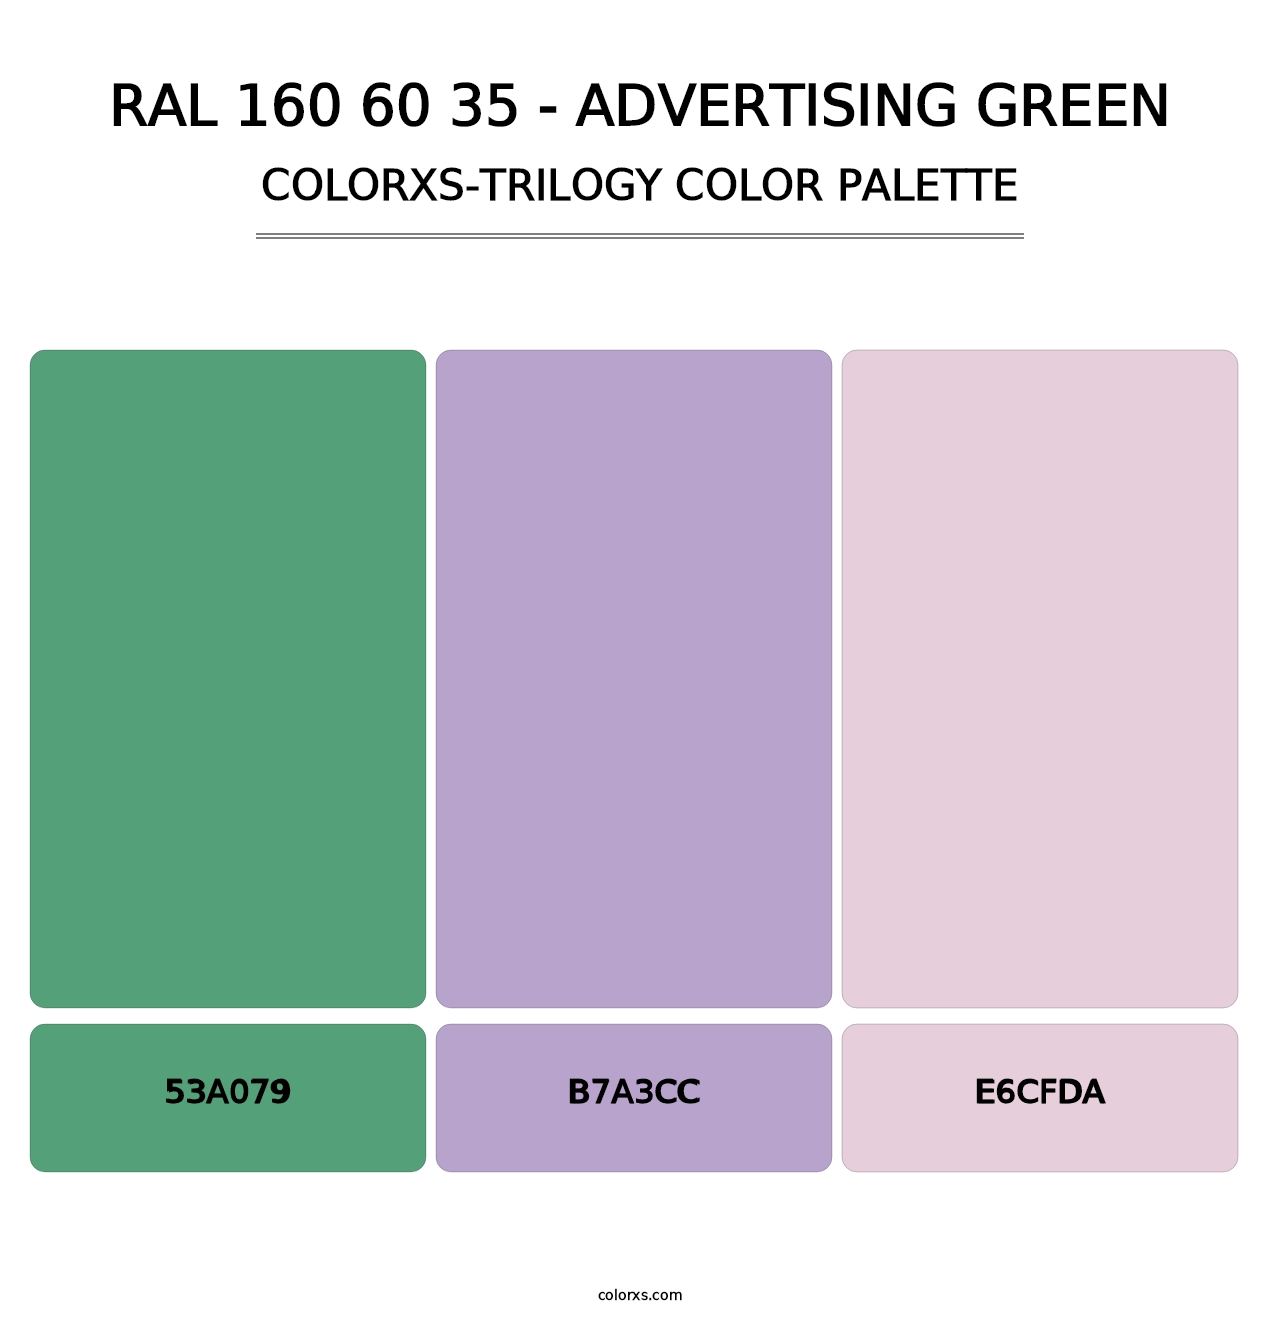 RAL 160 60 35 - Advertising Green - Colorxs Trilogy Palette